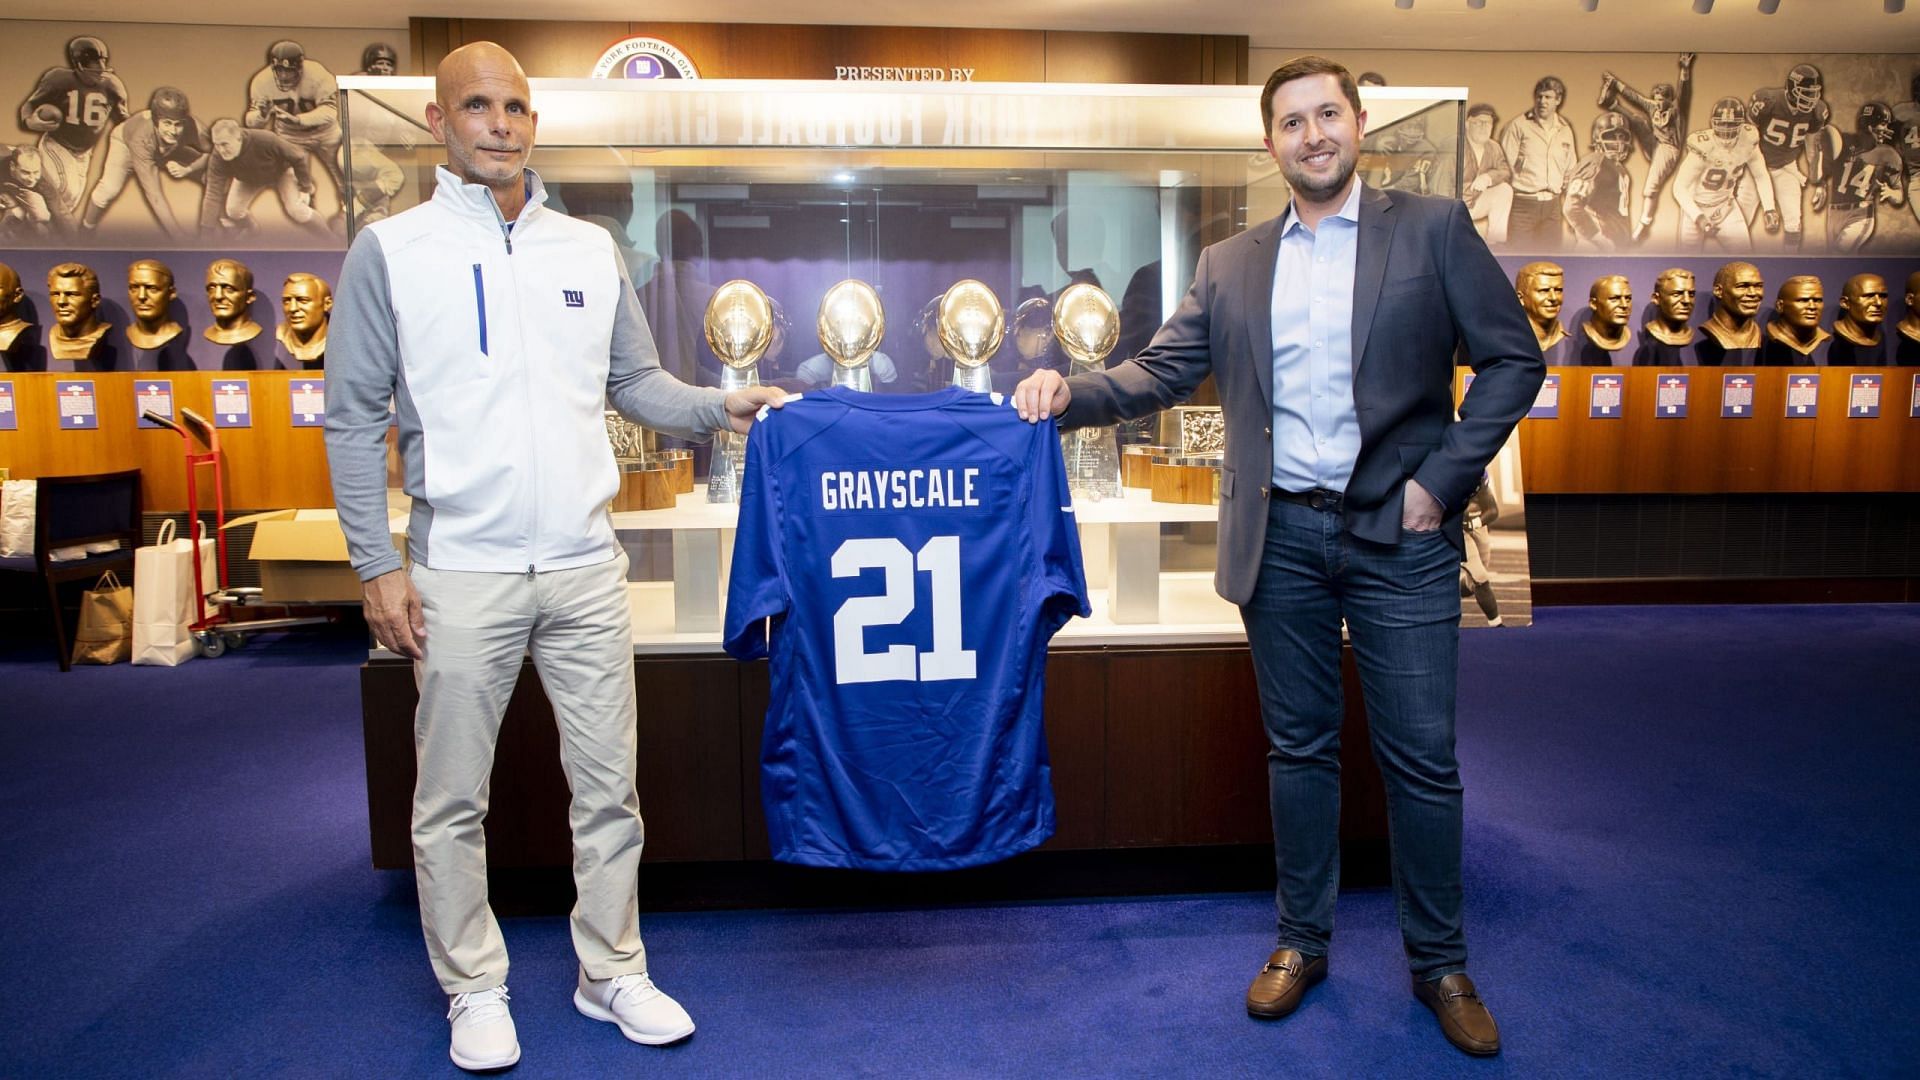 New York Giants partner with Grayscale Investments for first crypto sponorship